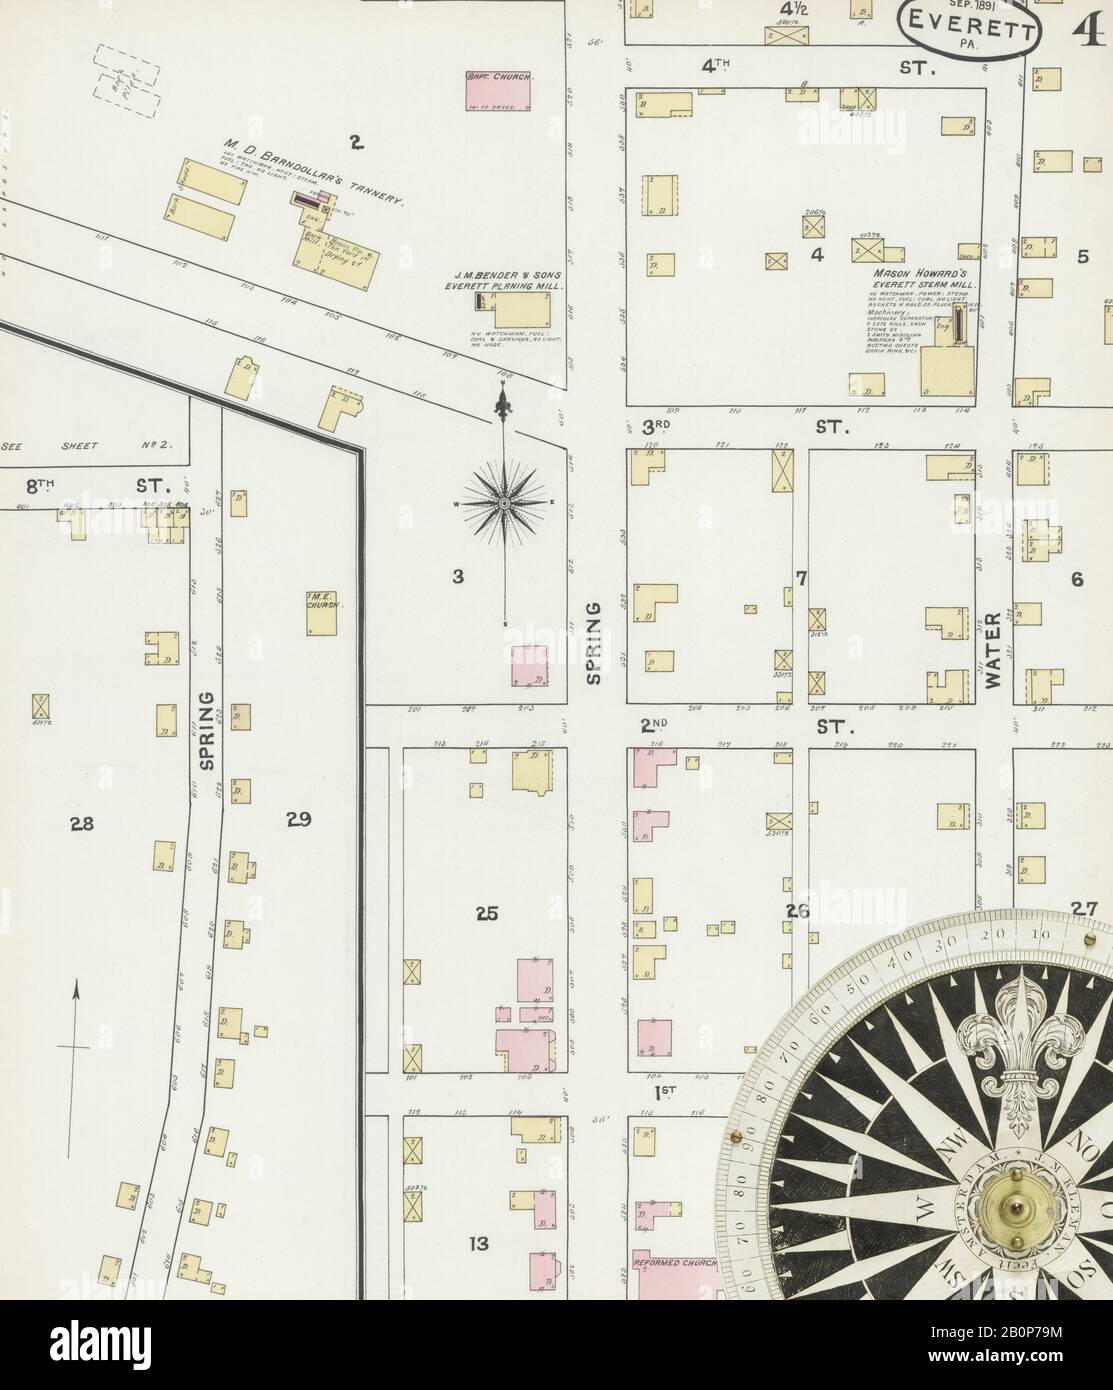 Image 4 of Sanborn Fire Insurance Map from Everett, Bedford County, Pennsylvania. Sep 1891. 4 Sheet(s), America, street map with a Nineteenth Century compass Stock Photo